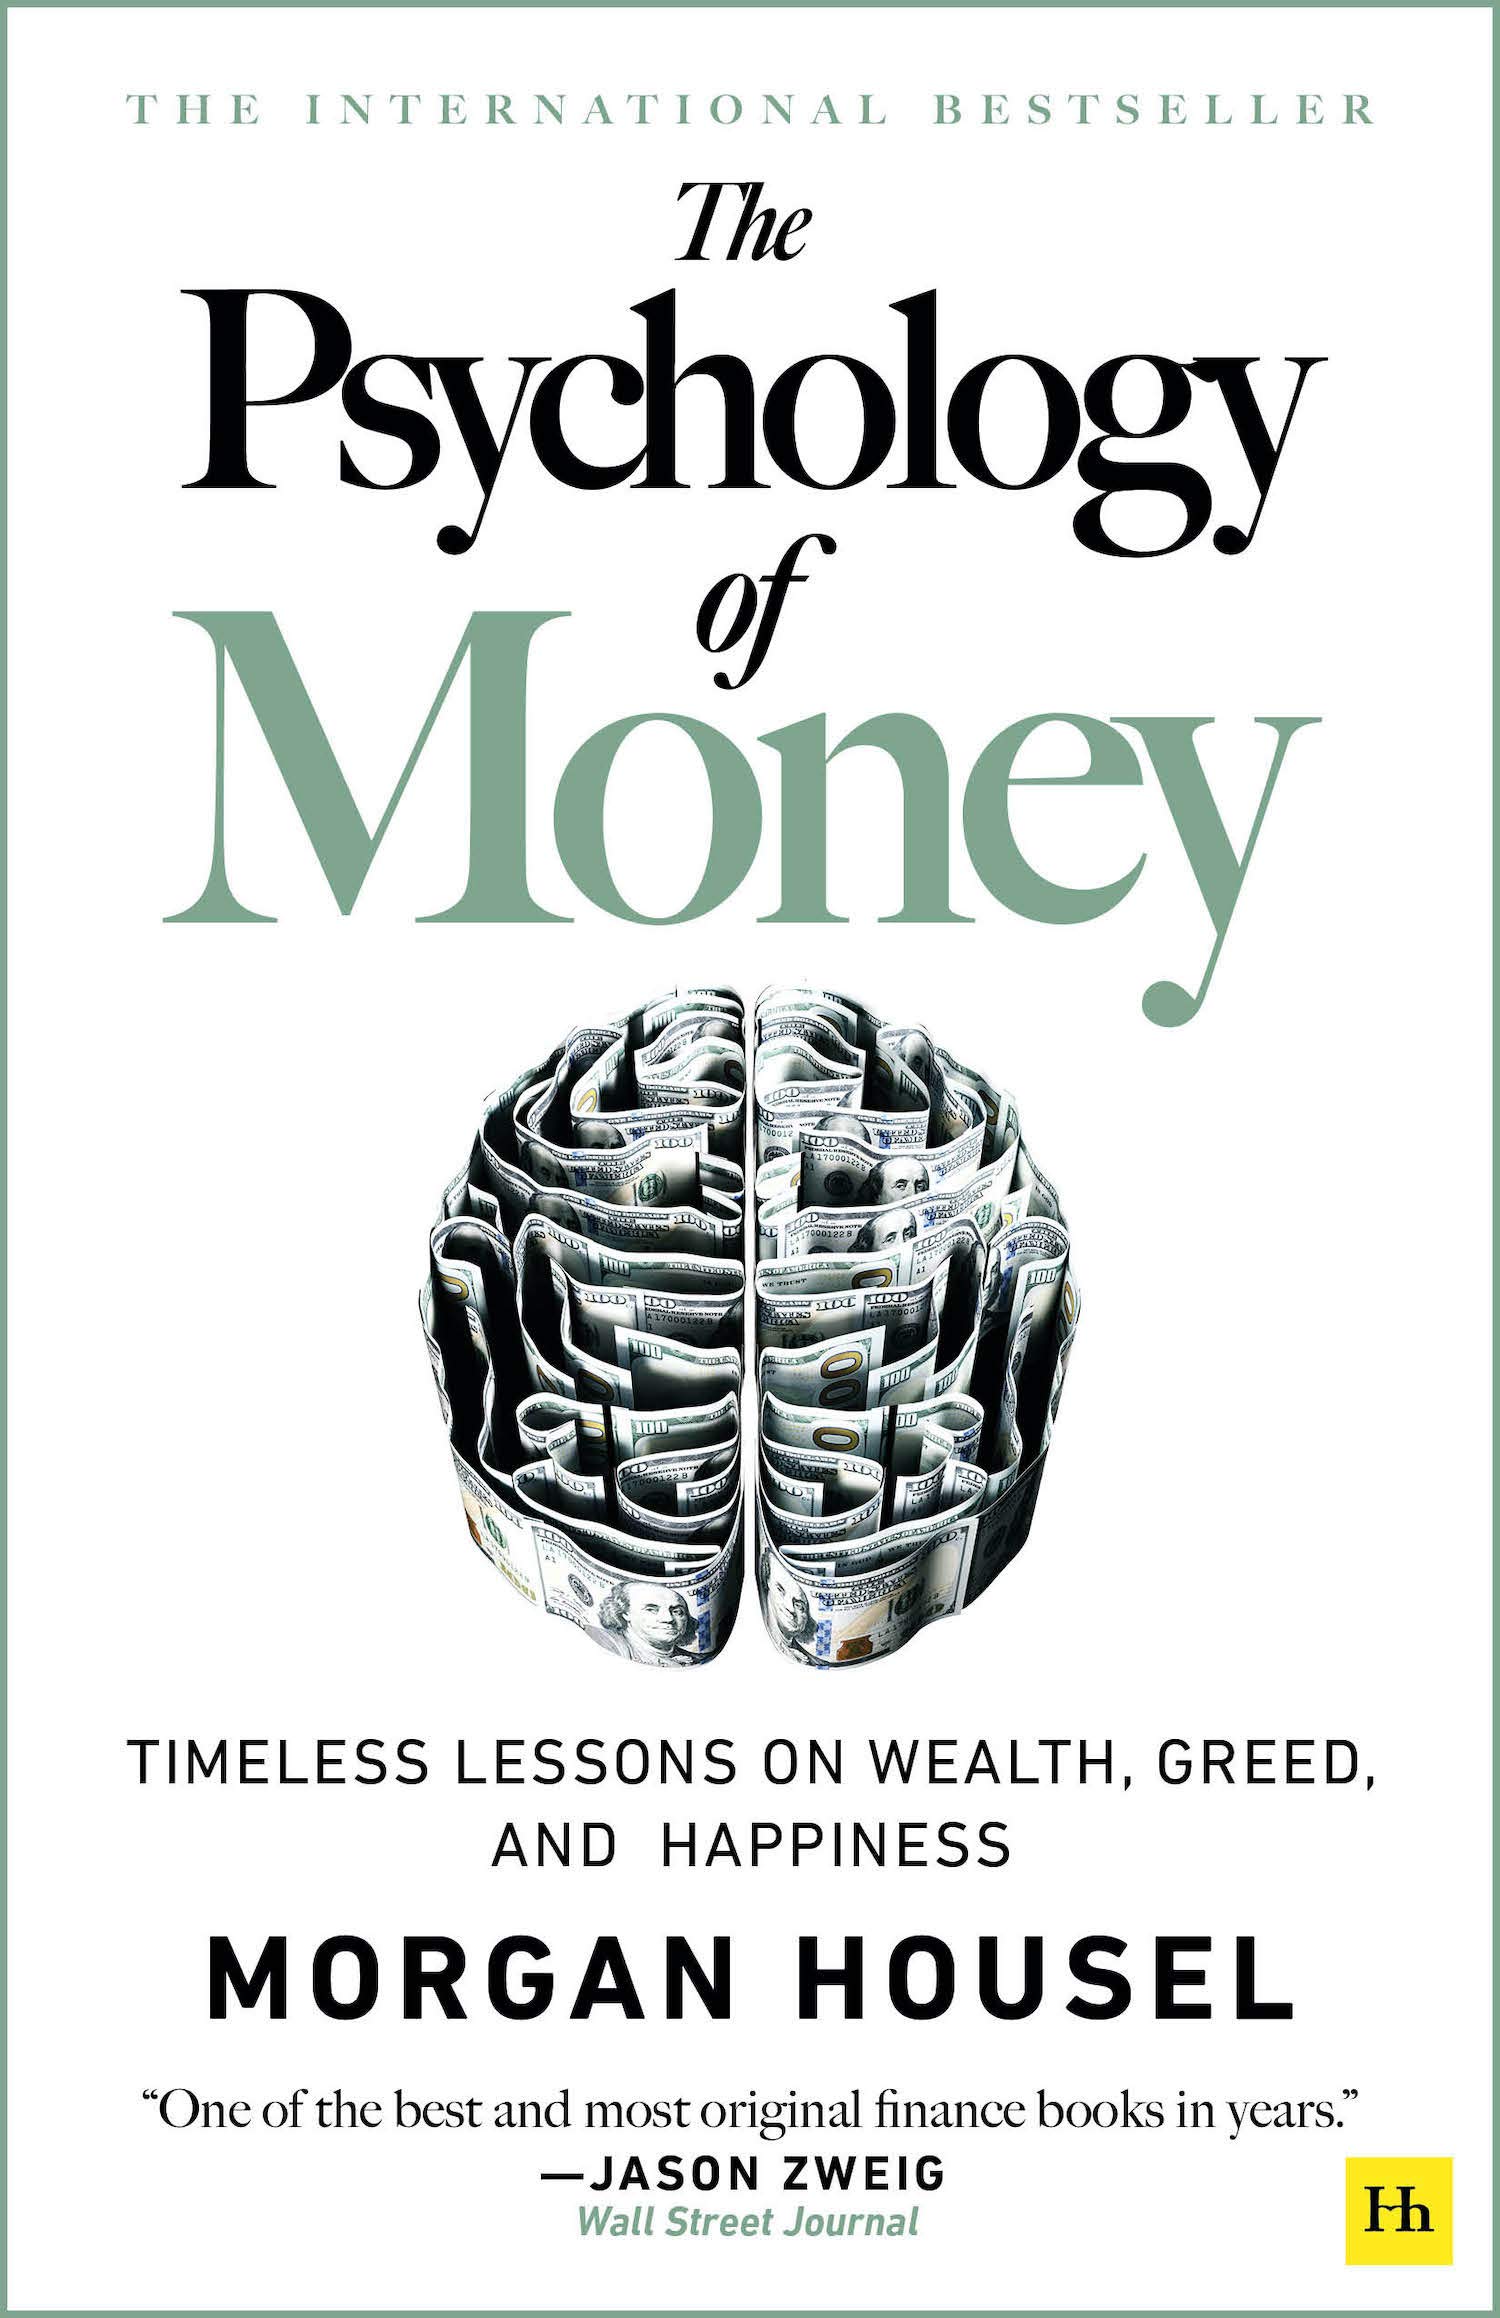 The Psychology of Money- Timeless lessons on wealth, greed, and happiness